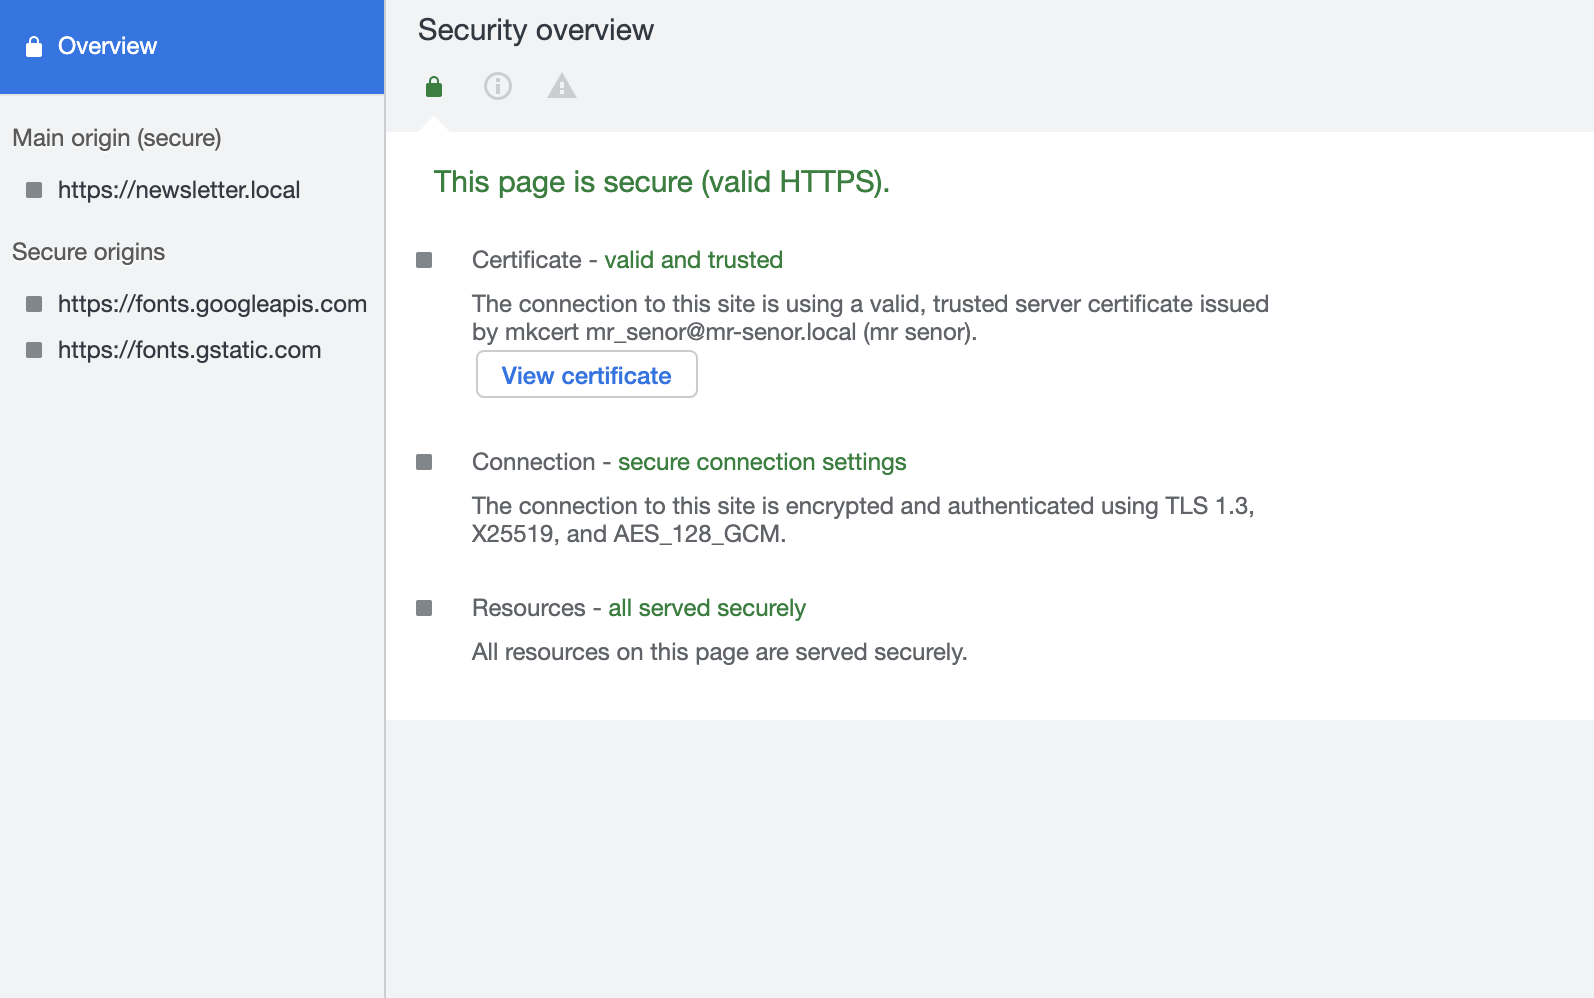 HTTPS security overview